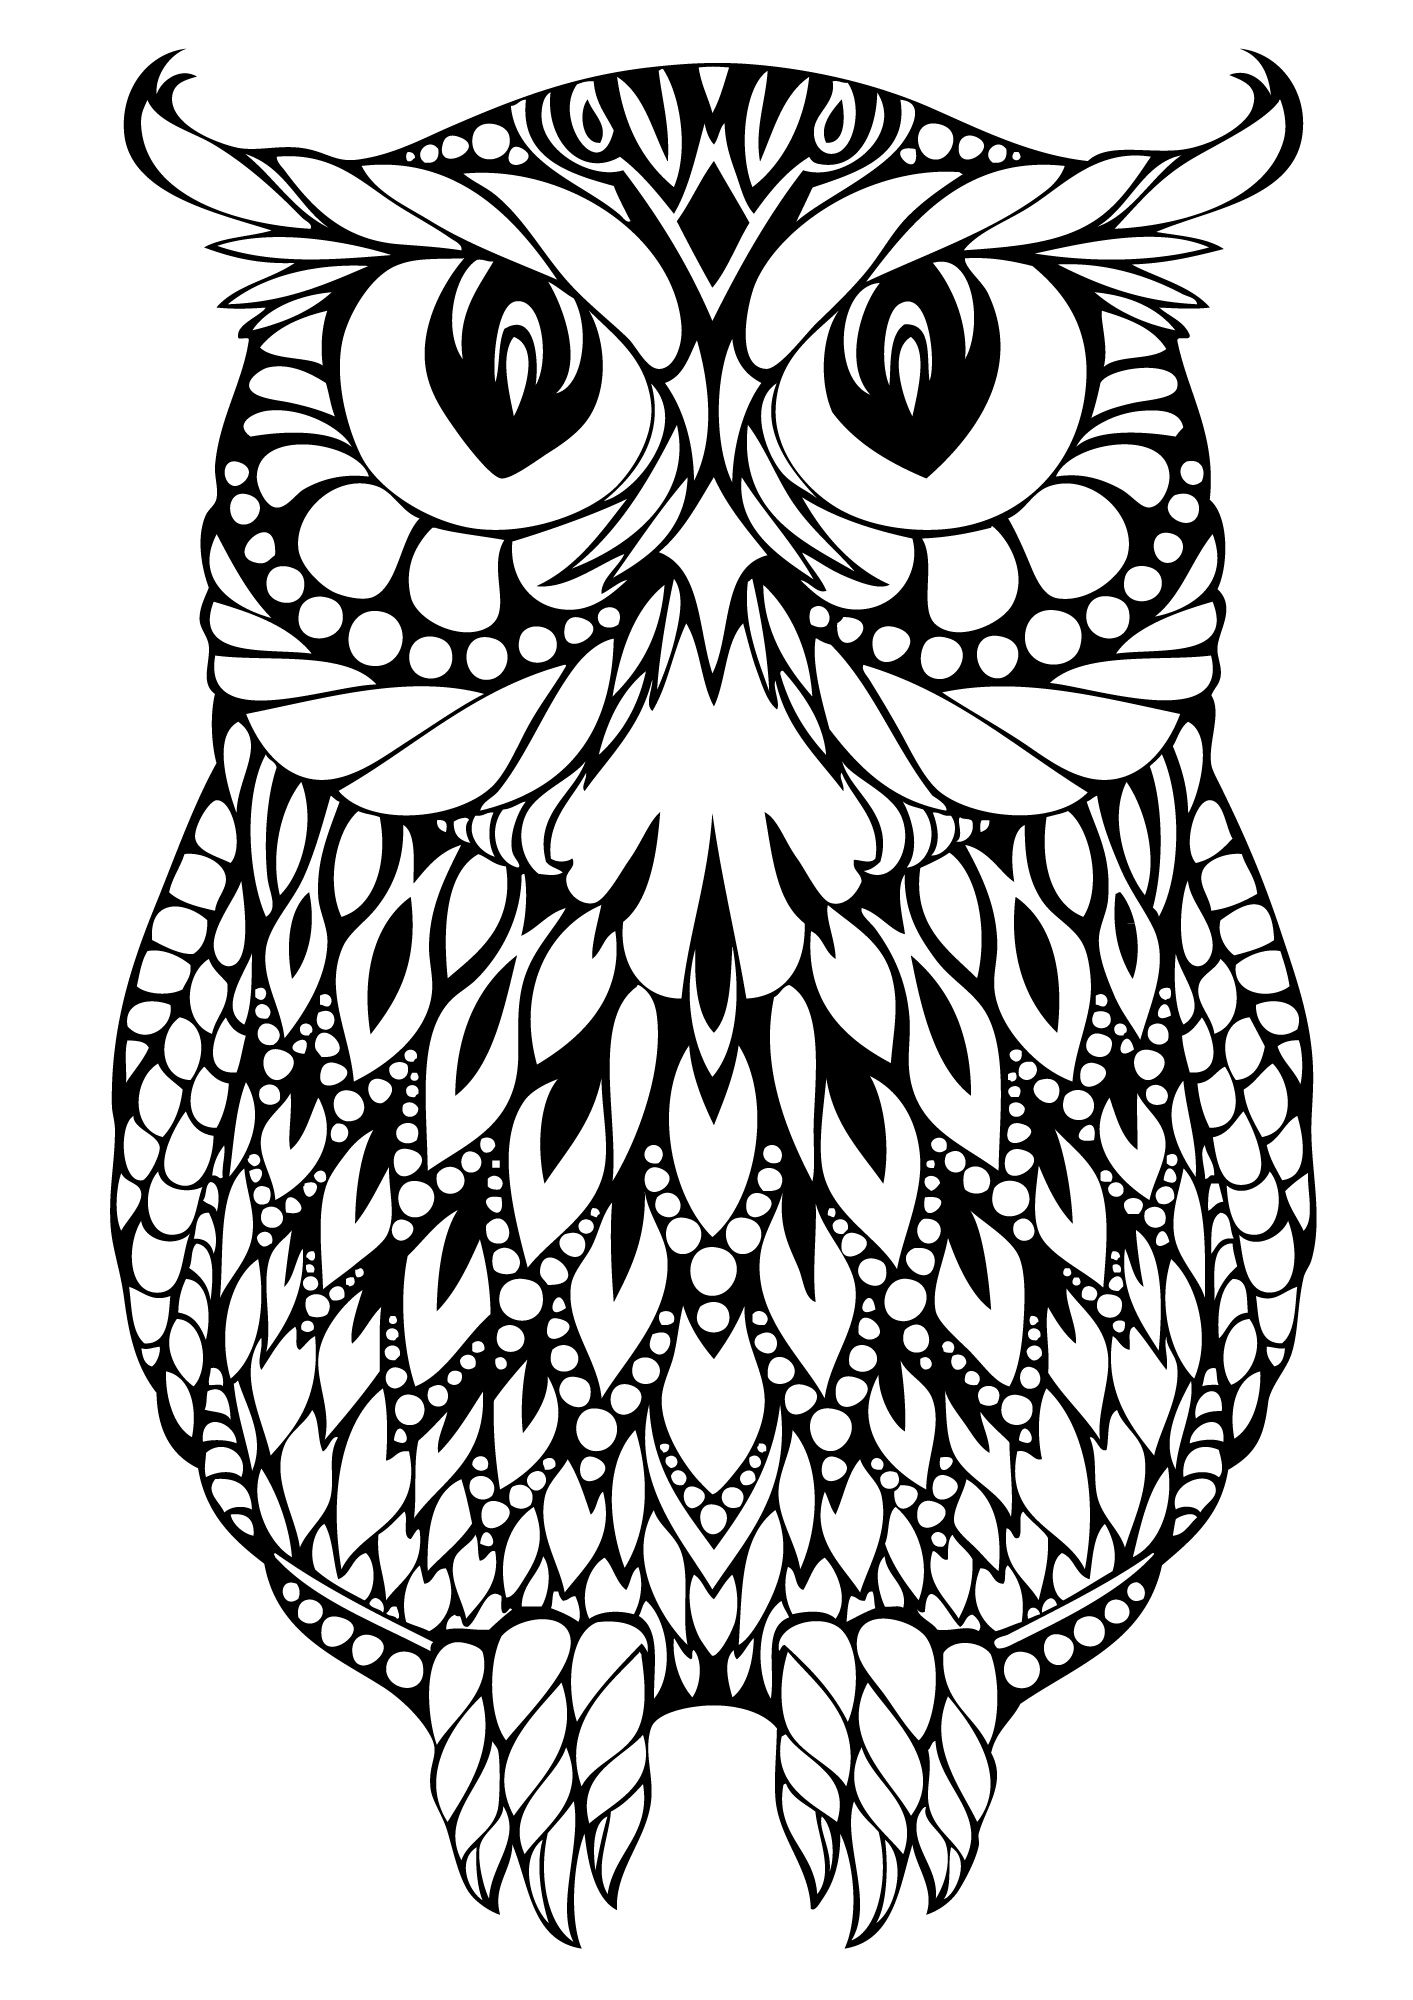 Halloween Owl Coloring Pages - Coloring Home